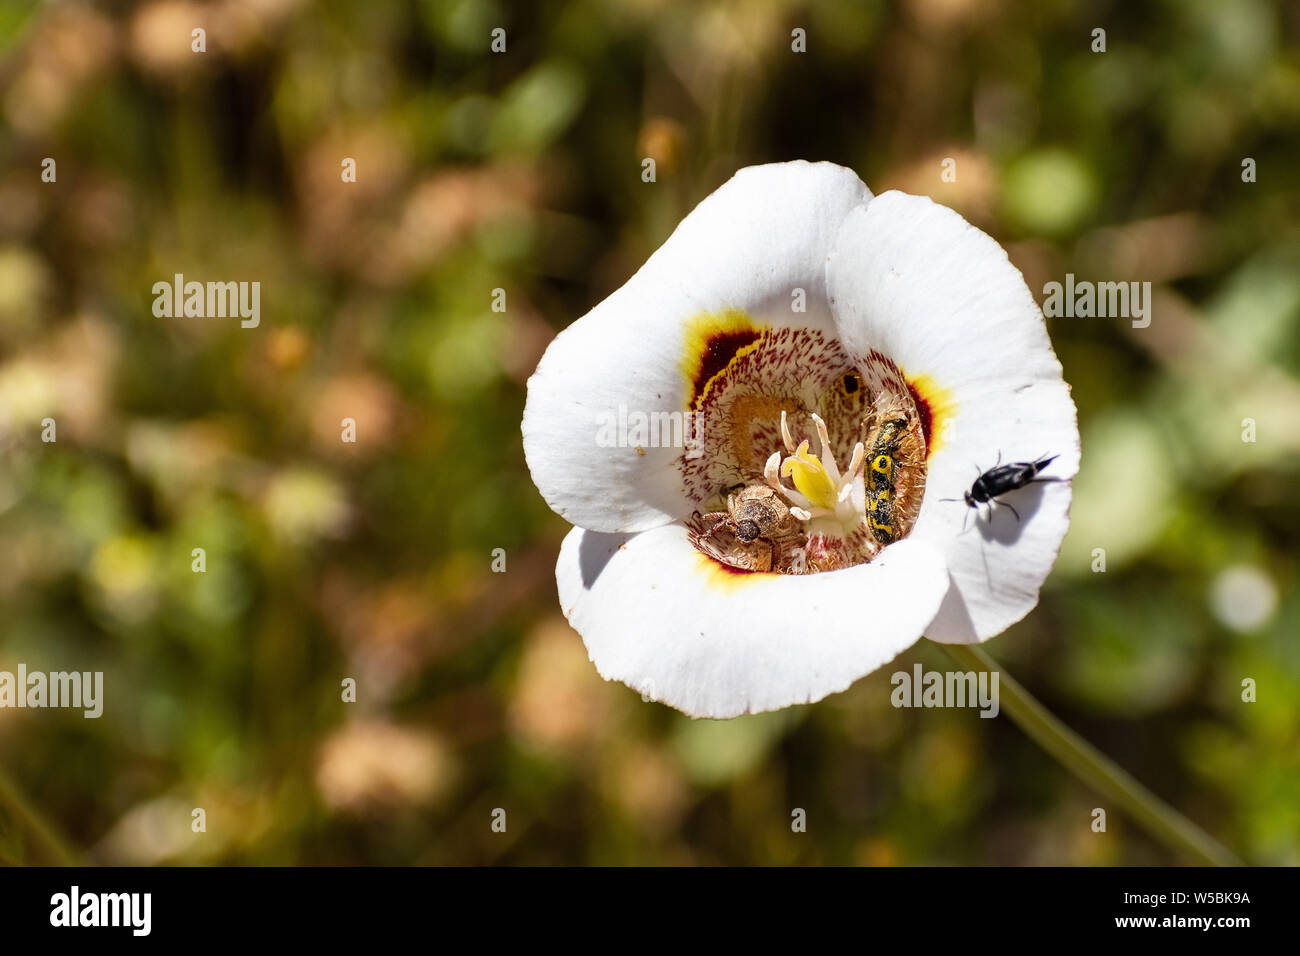 Close up of Butterfly Mariposa Lily (Calochortus venustus) wildflower blooming in Yosemite National Park, Sierra Nevada mountains, California Stock Photo